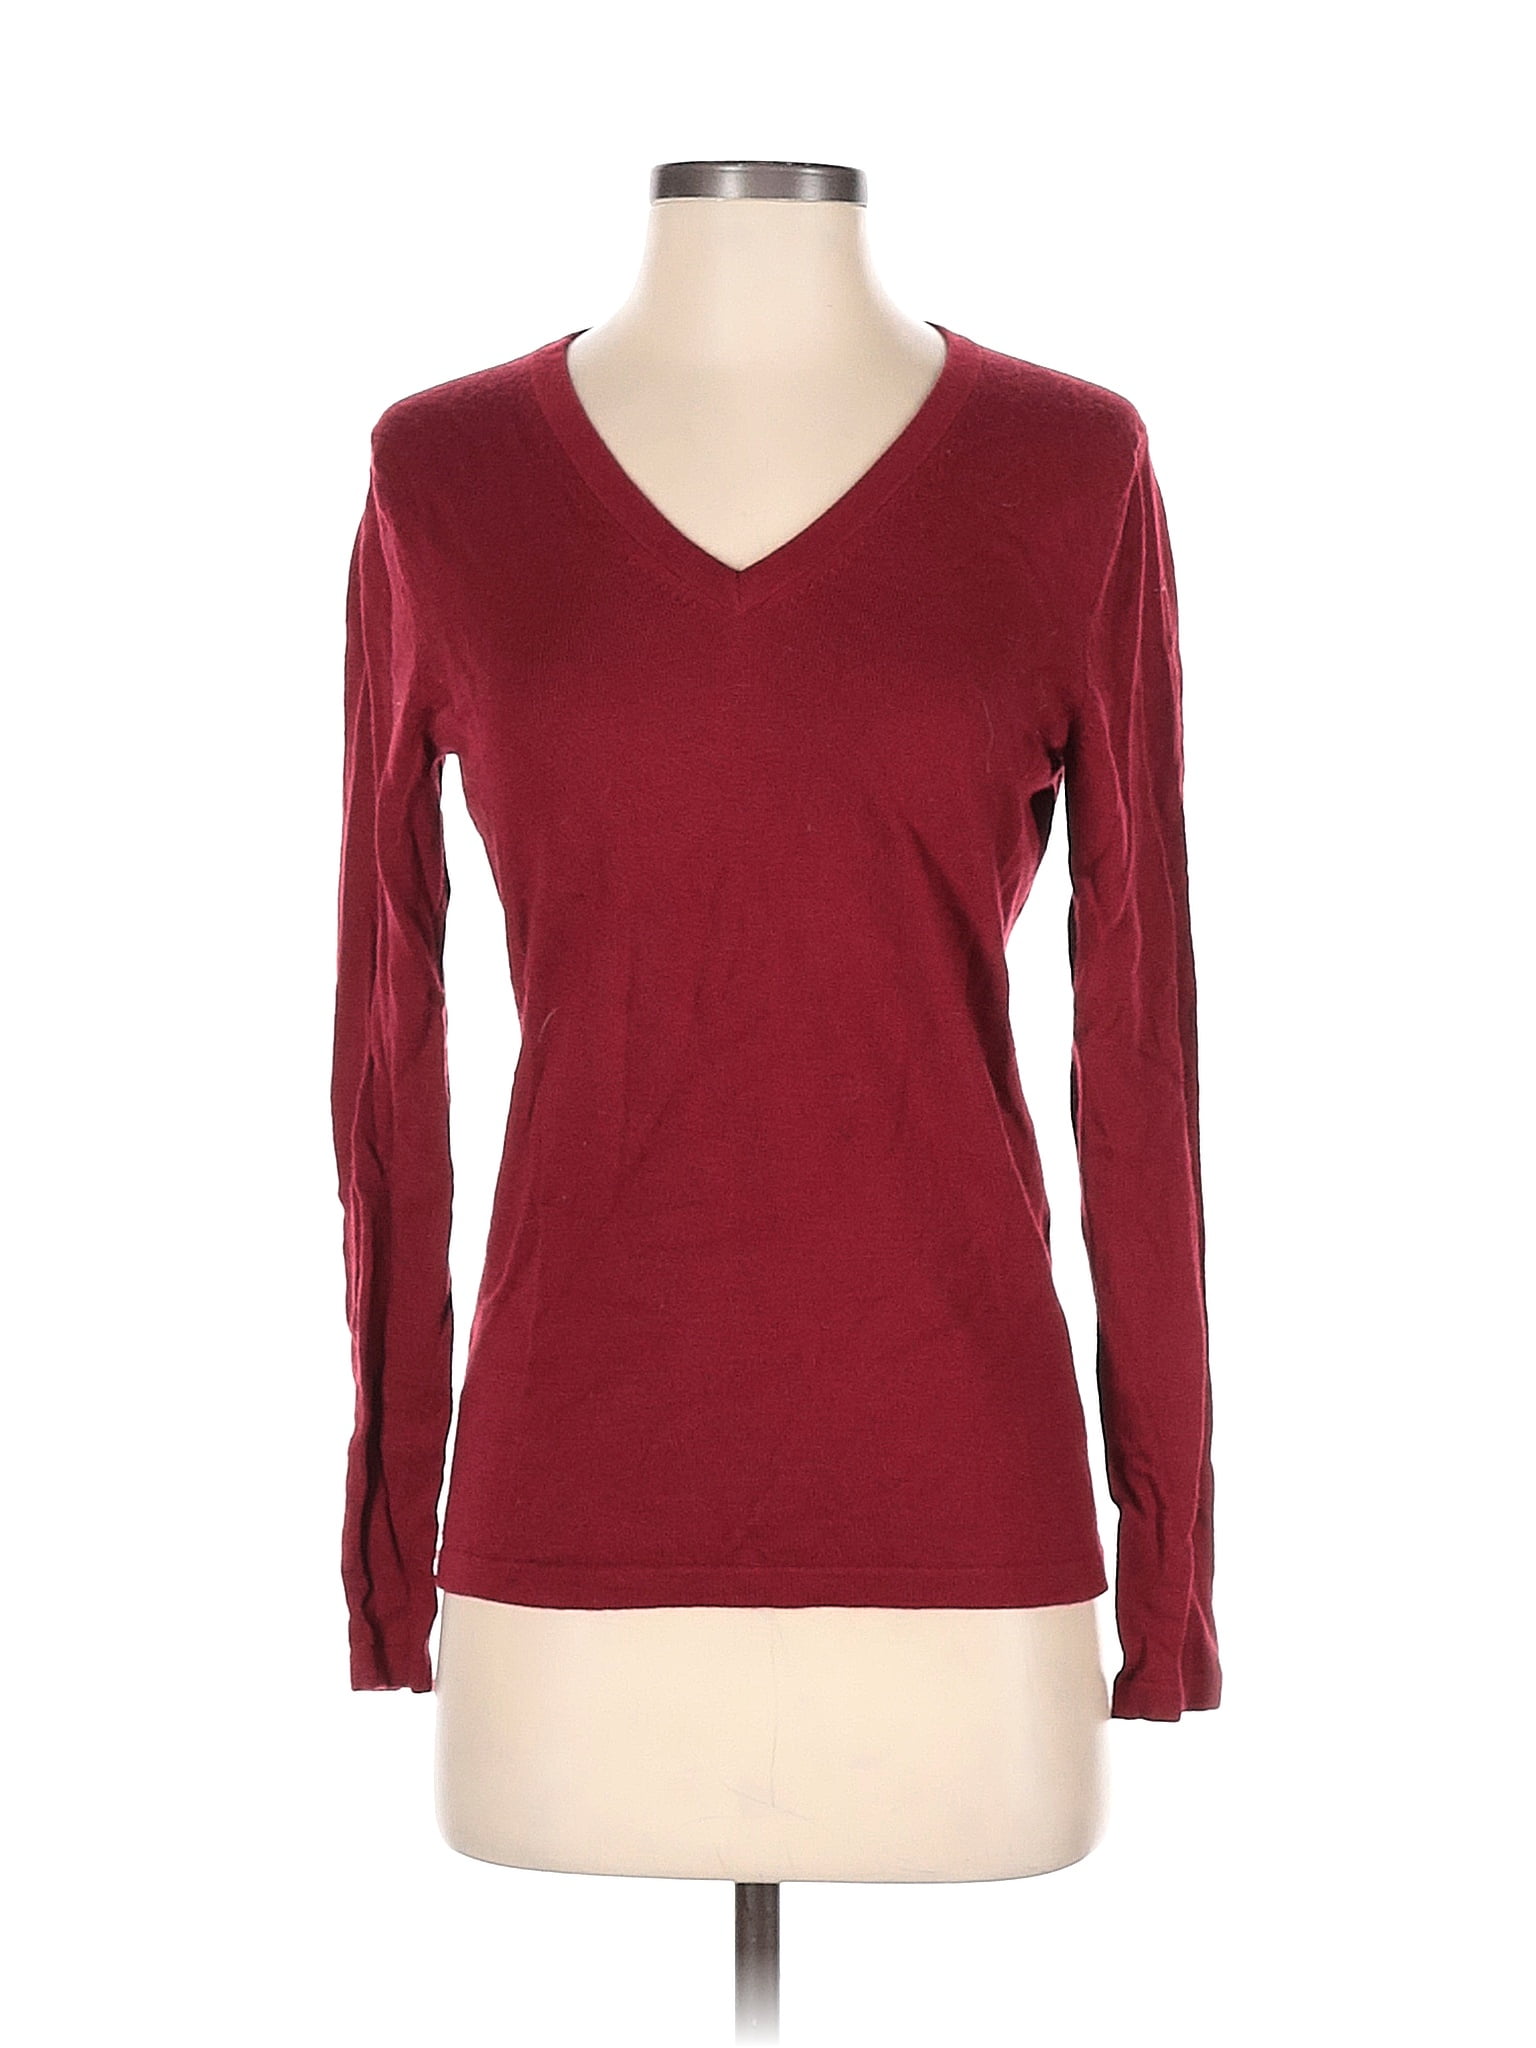 Lord & Taylor 100% Merino Wool Red Pullover Sweater Size S - 74% off ...